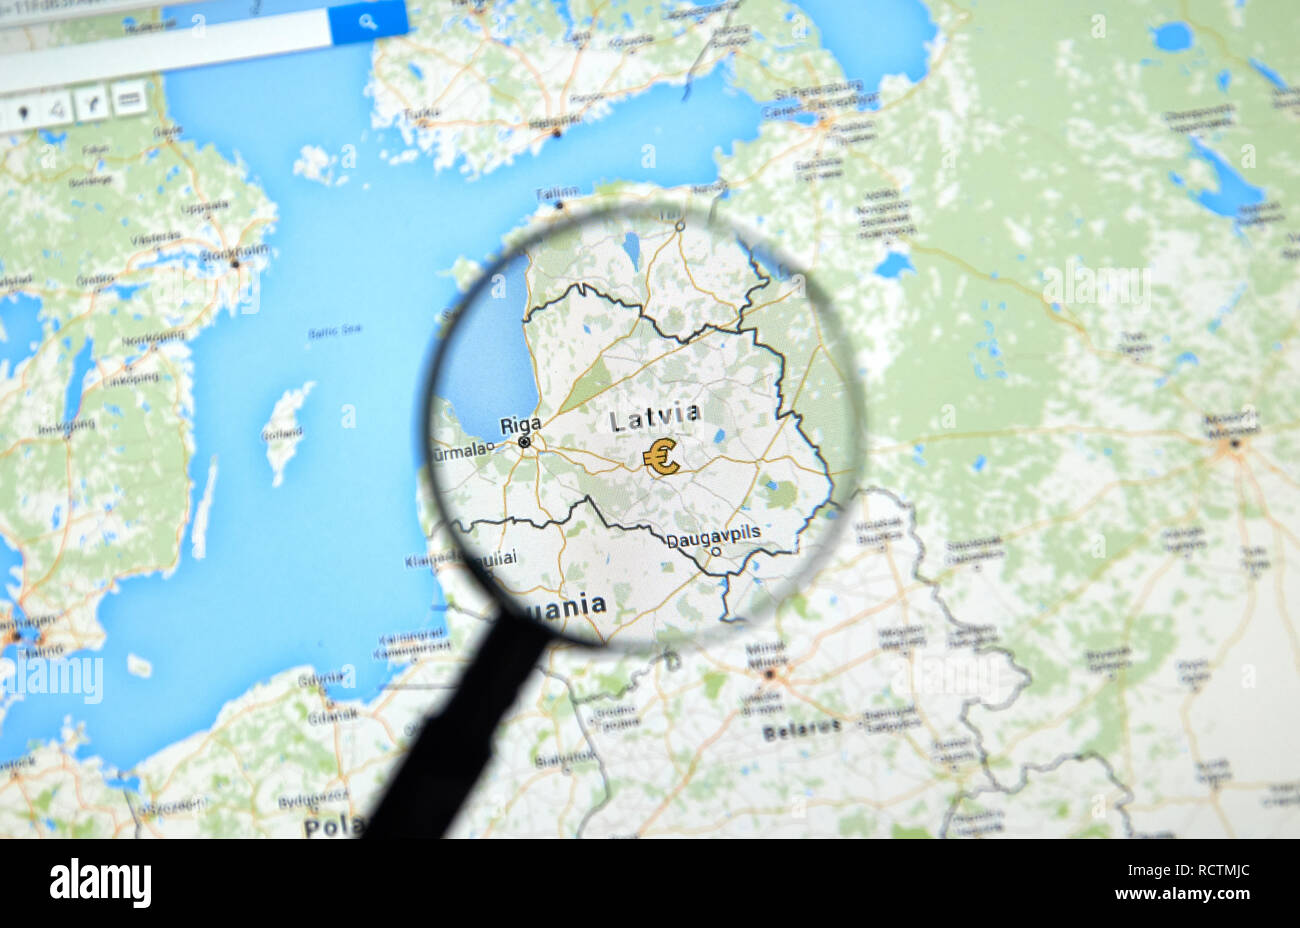 MONTREAL, CANADA - JUNE 24, 2016 - Latvia on Google Maps app under magnifying glass. Latvia is a european country and a member of EU. Stock Photo